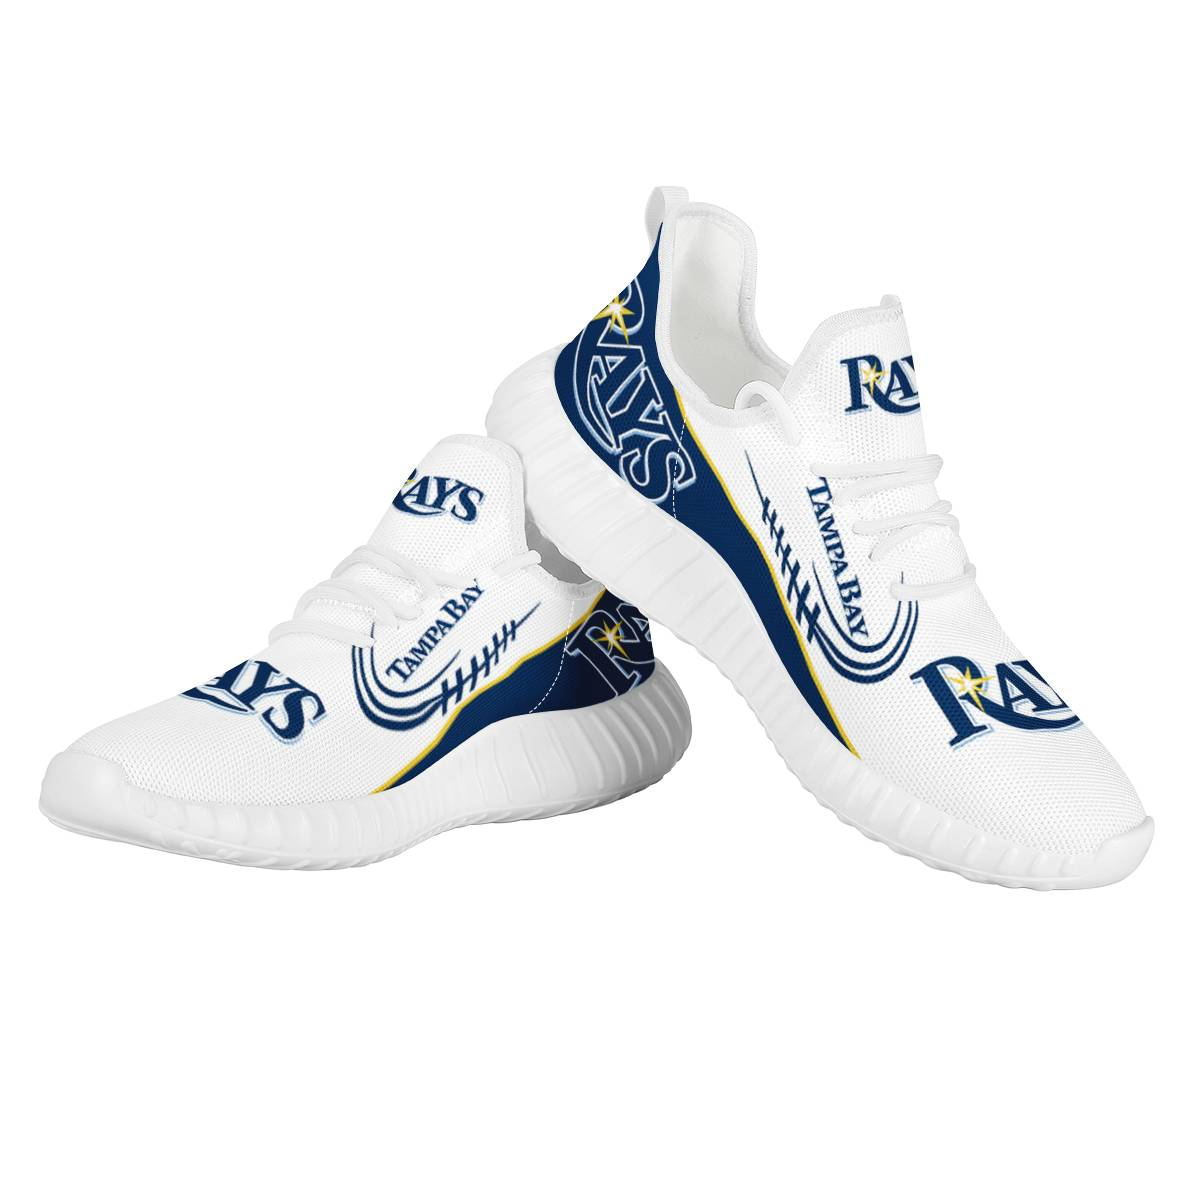 Men's MLB Tampa Bay Rays Mesh Knit Sneakers/Shoes 003